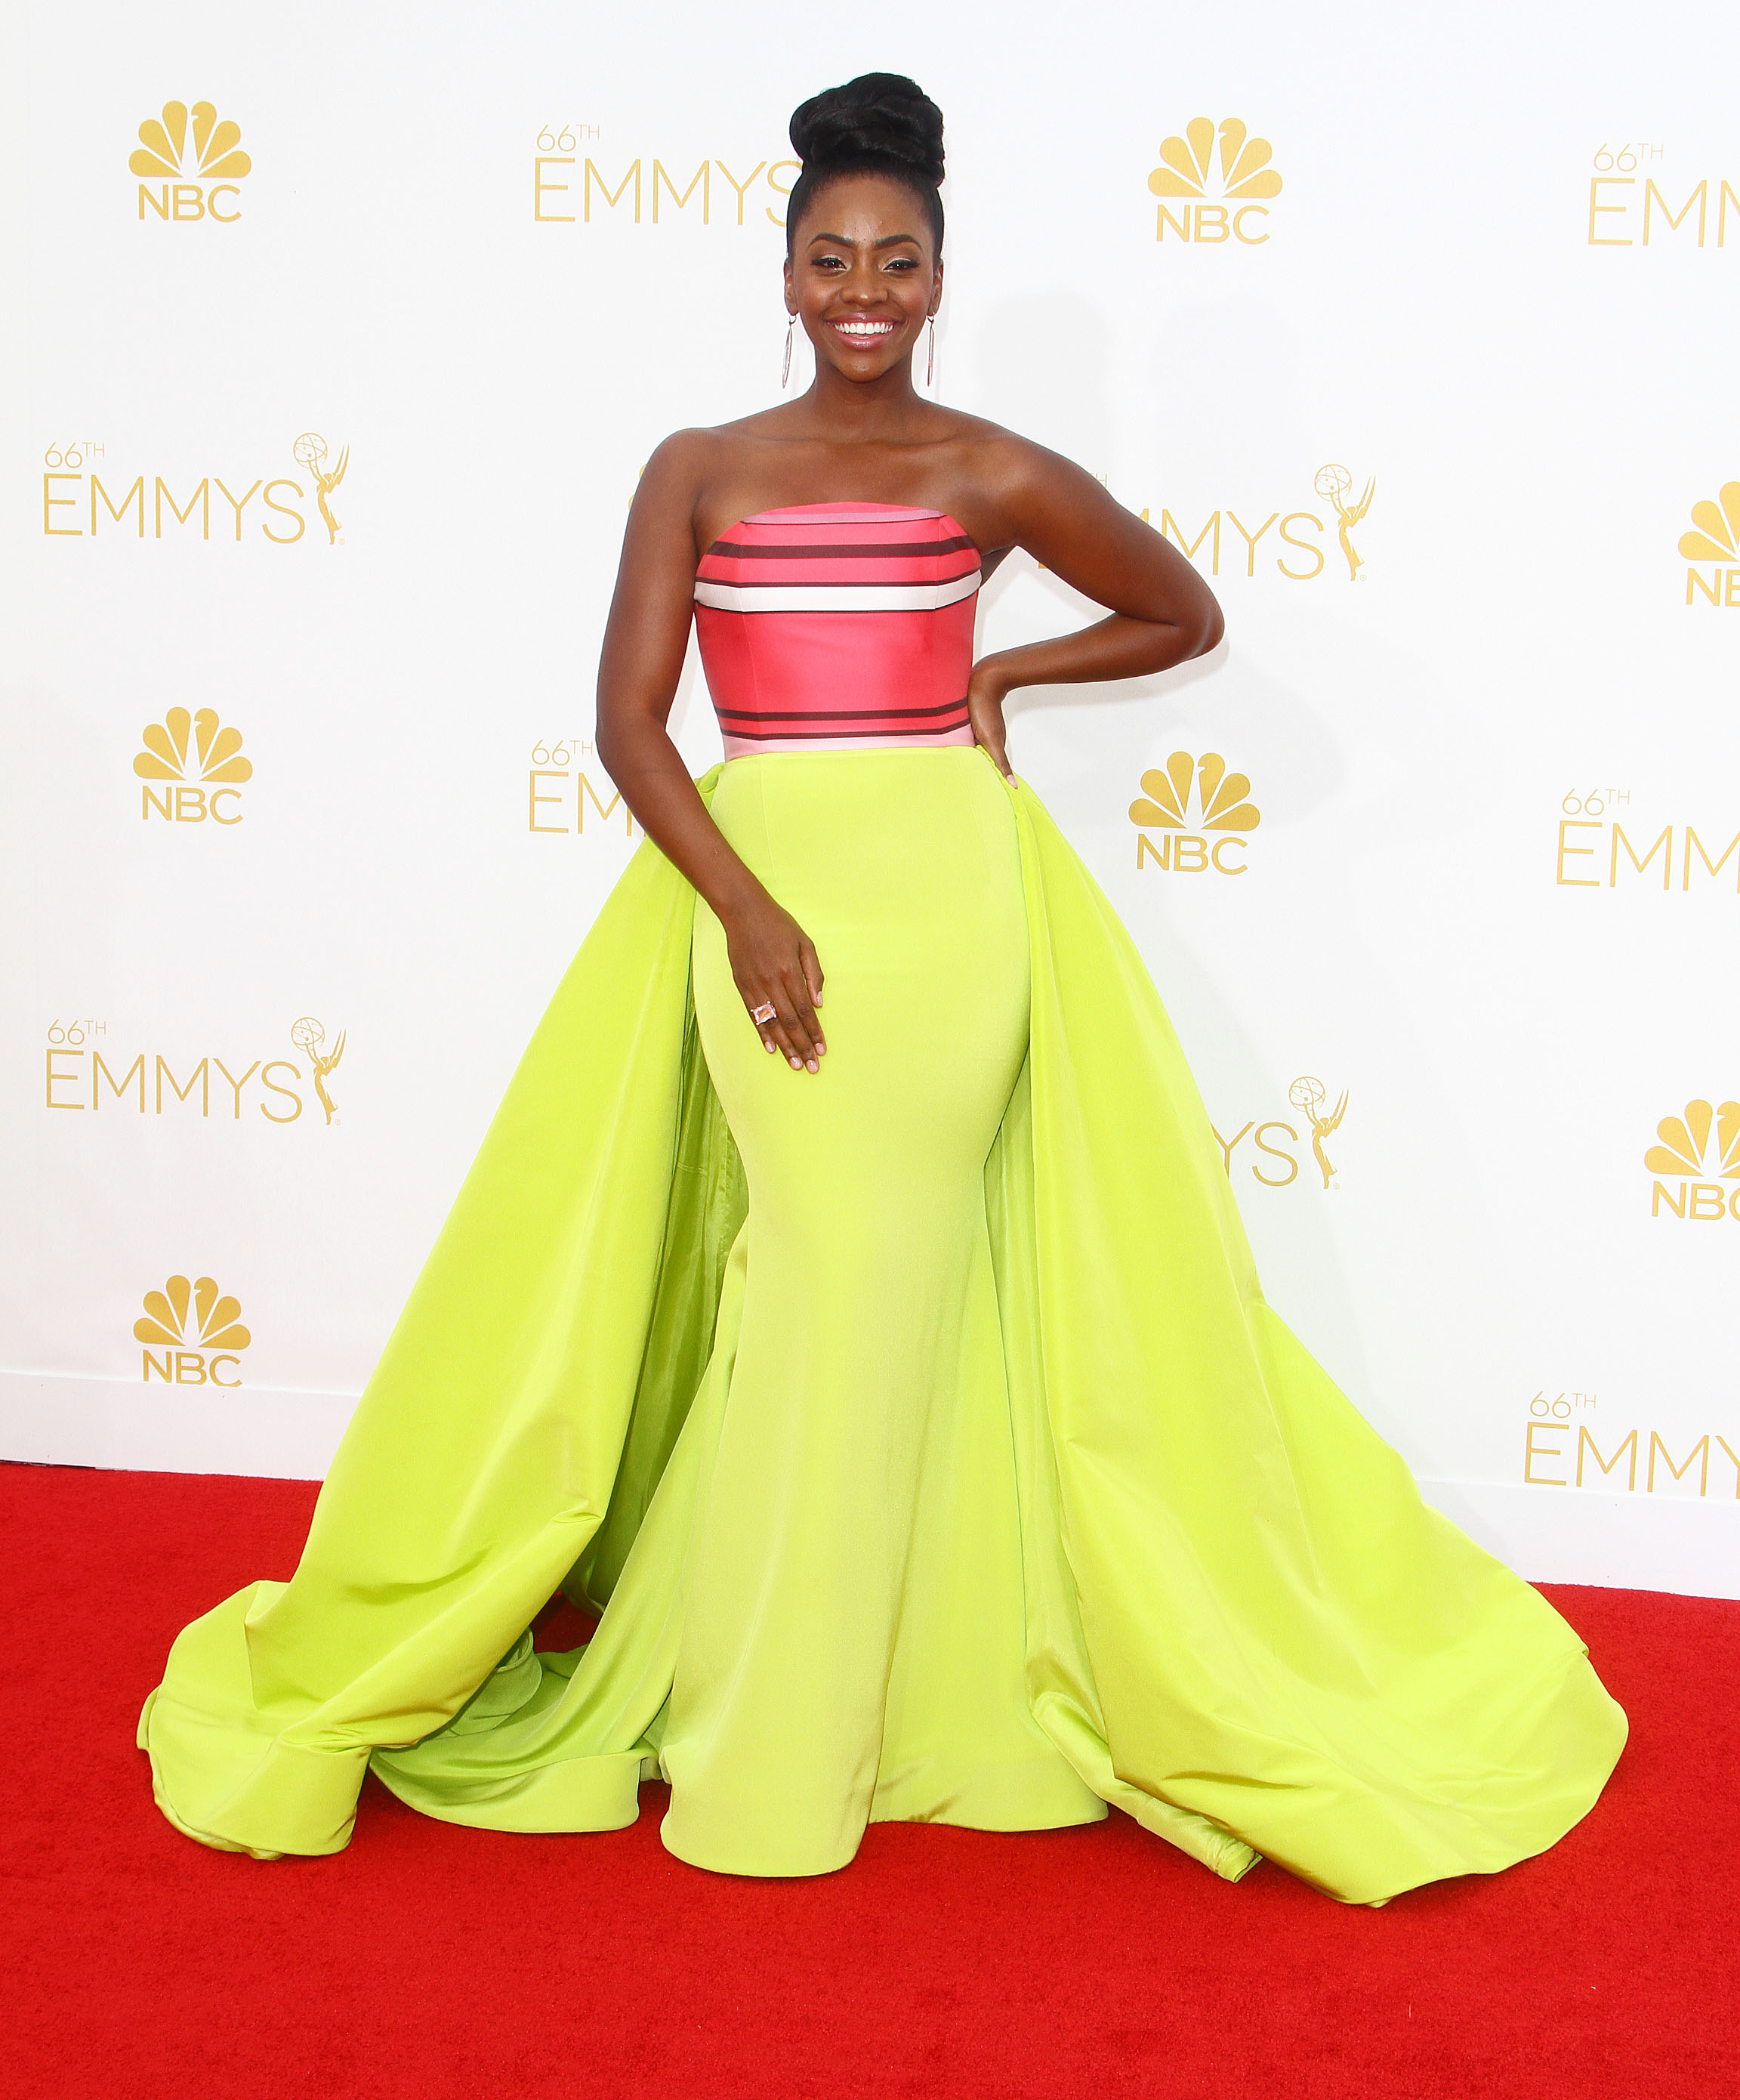 Emmys Well Played: Teyonah Parris in Christian Siriano